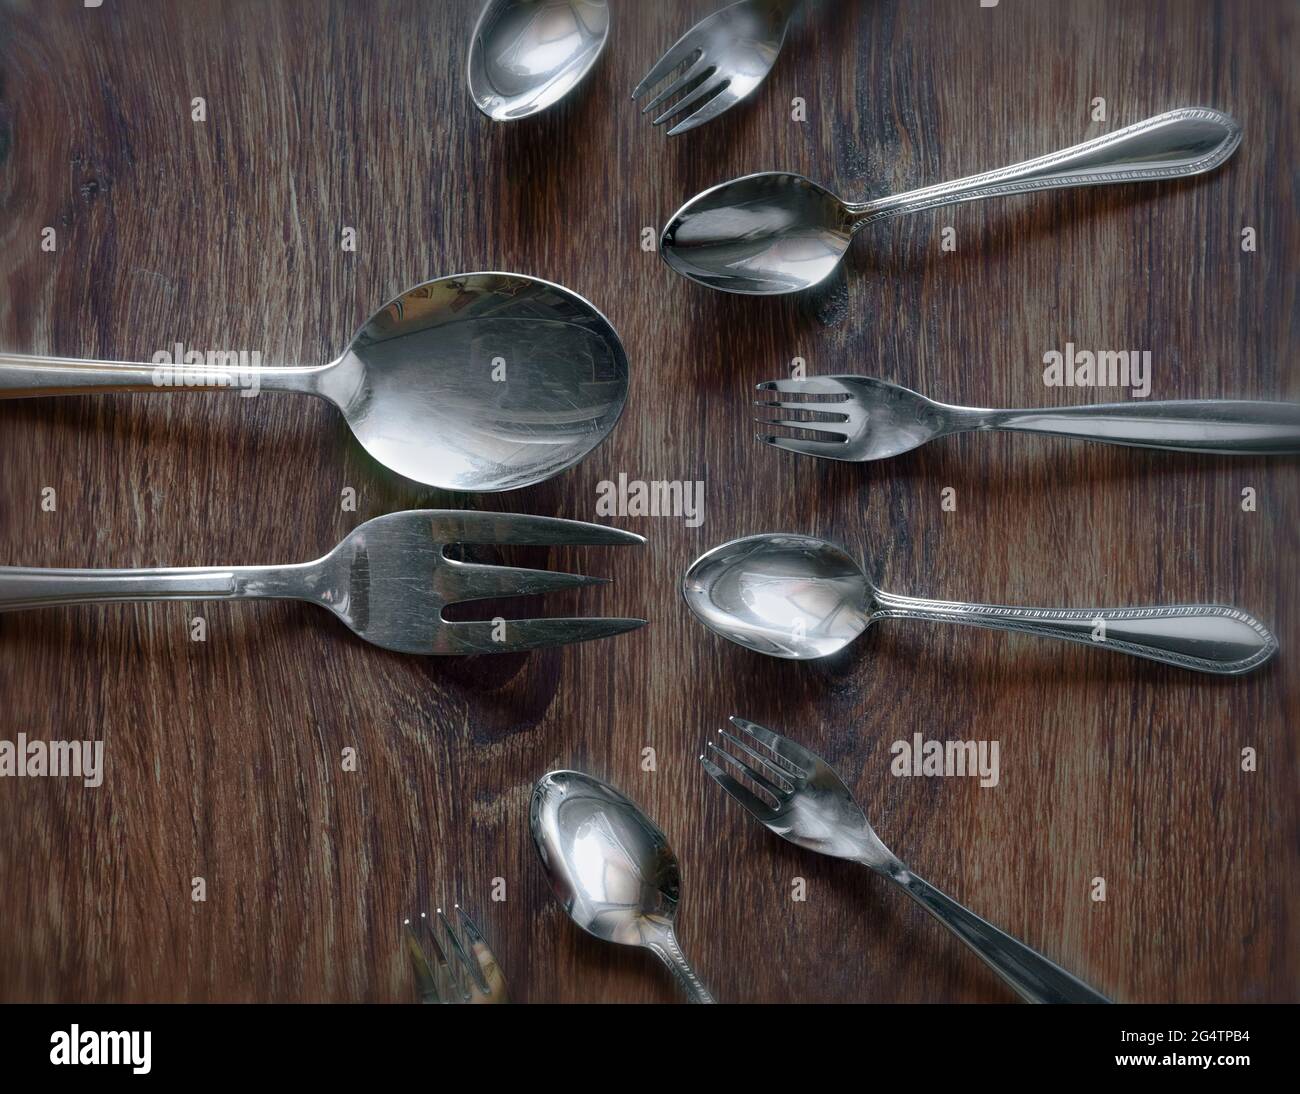 A large spoon and fork surrounded by smaller ones Stock Photo